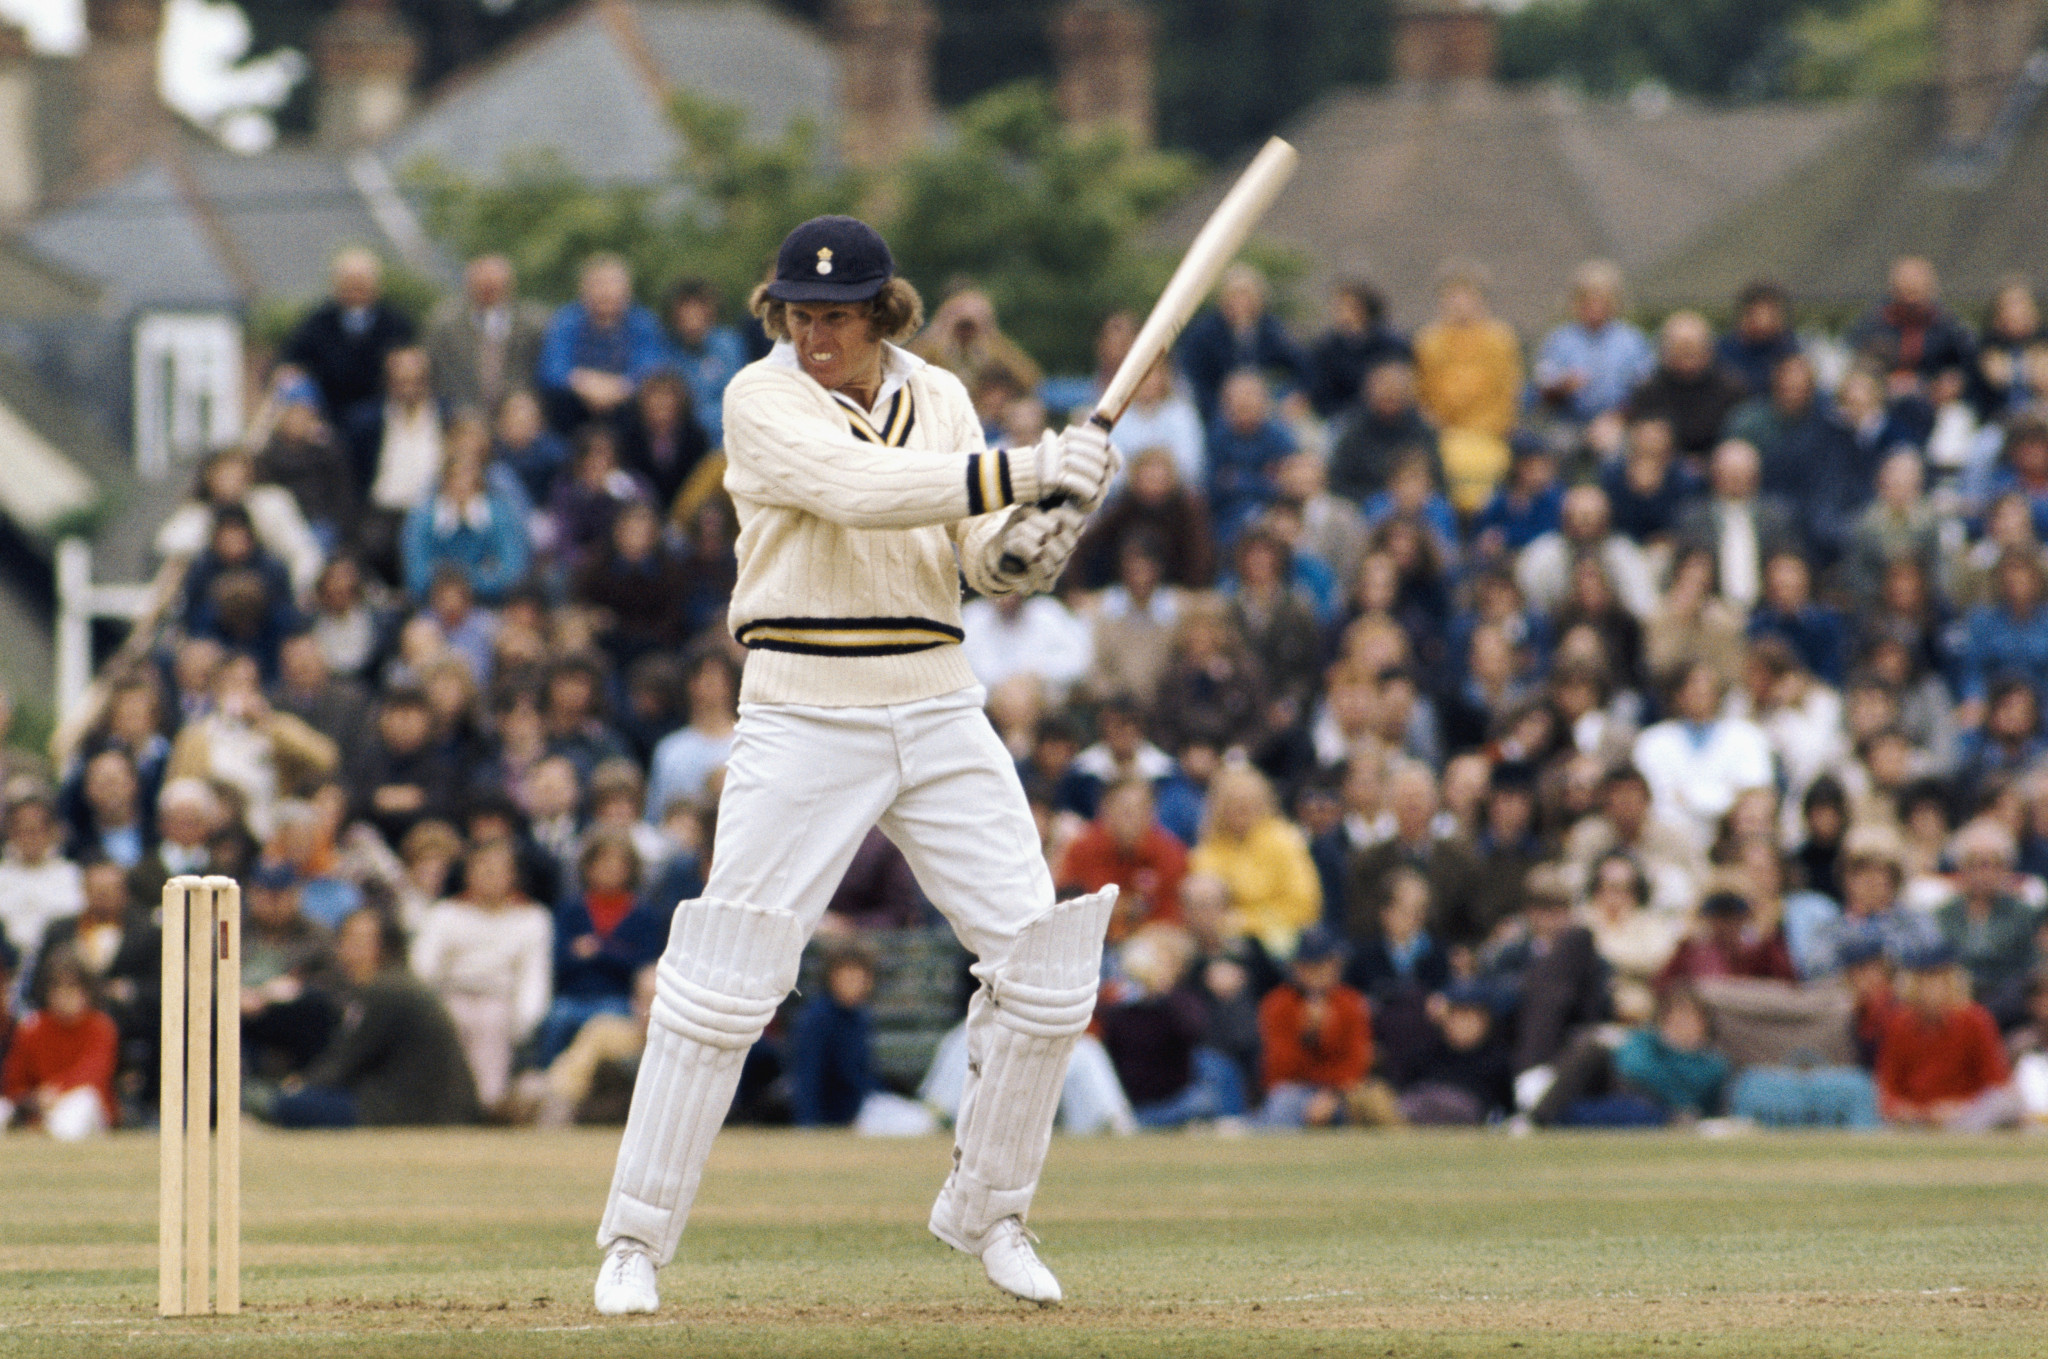 Prolific opening batsman Barry Richards only played four Test matches as a result of the ban imposed on South Africa ©Getty Images.